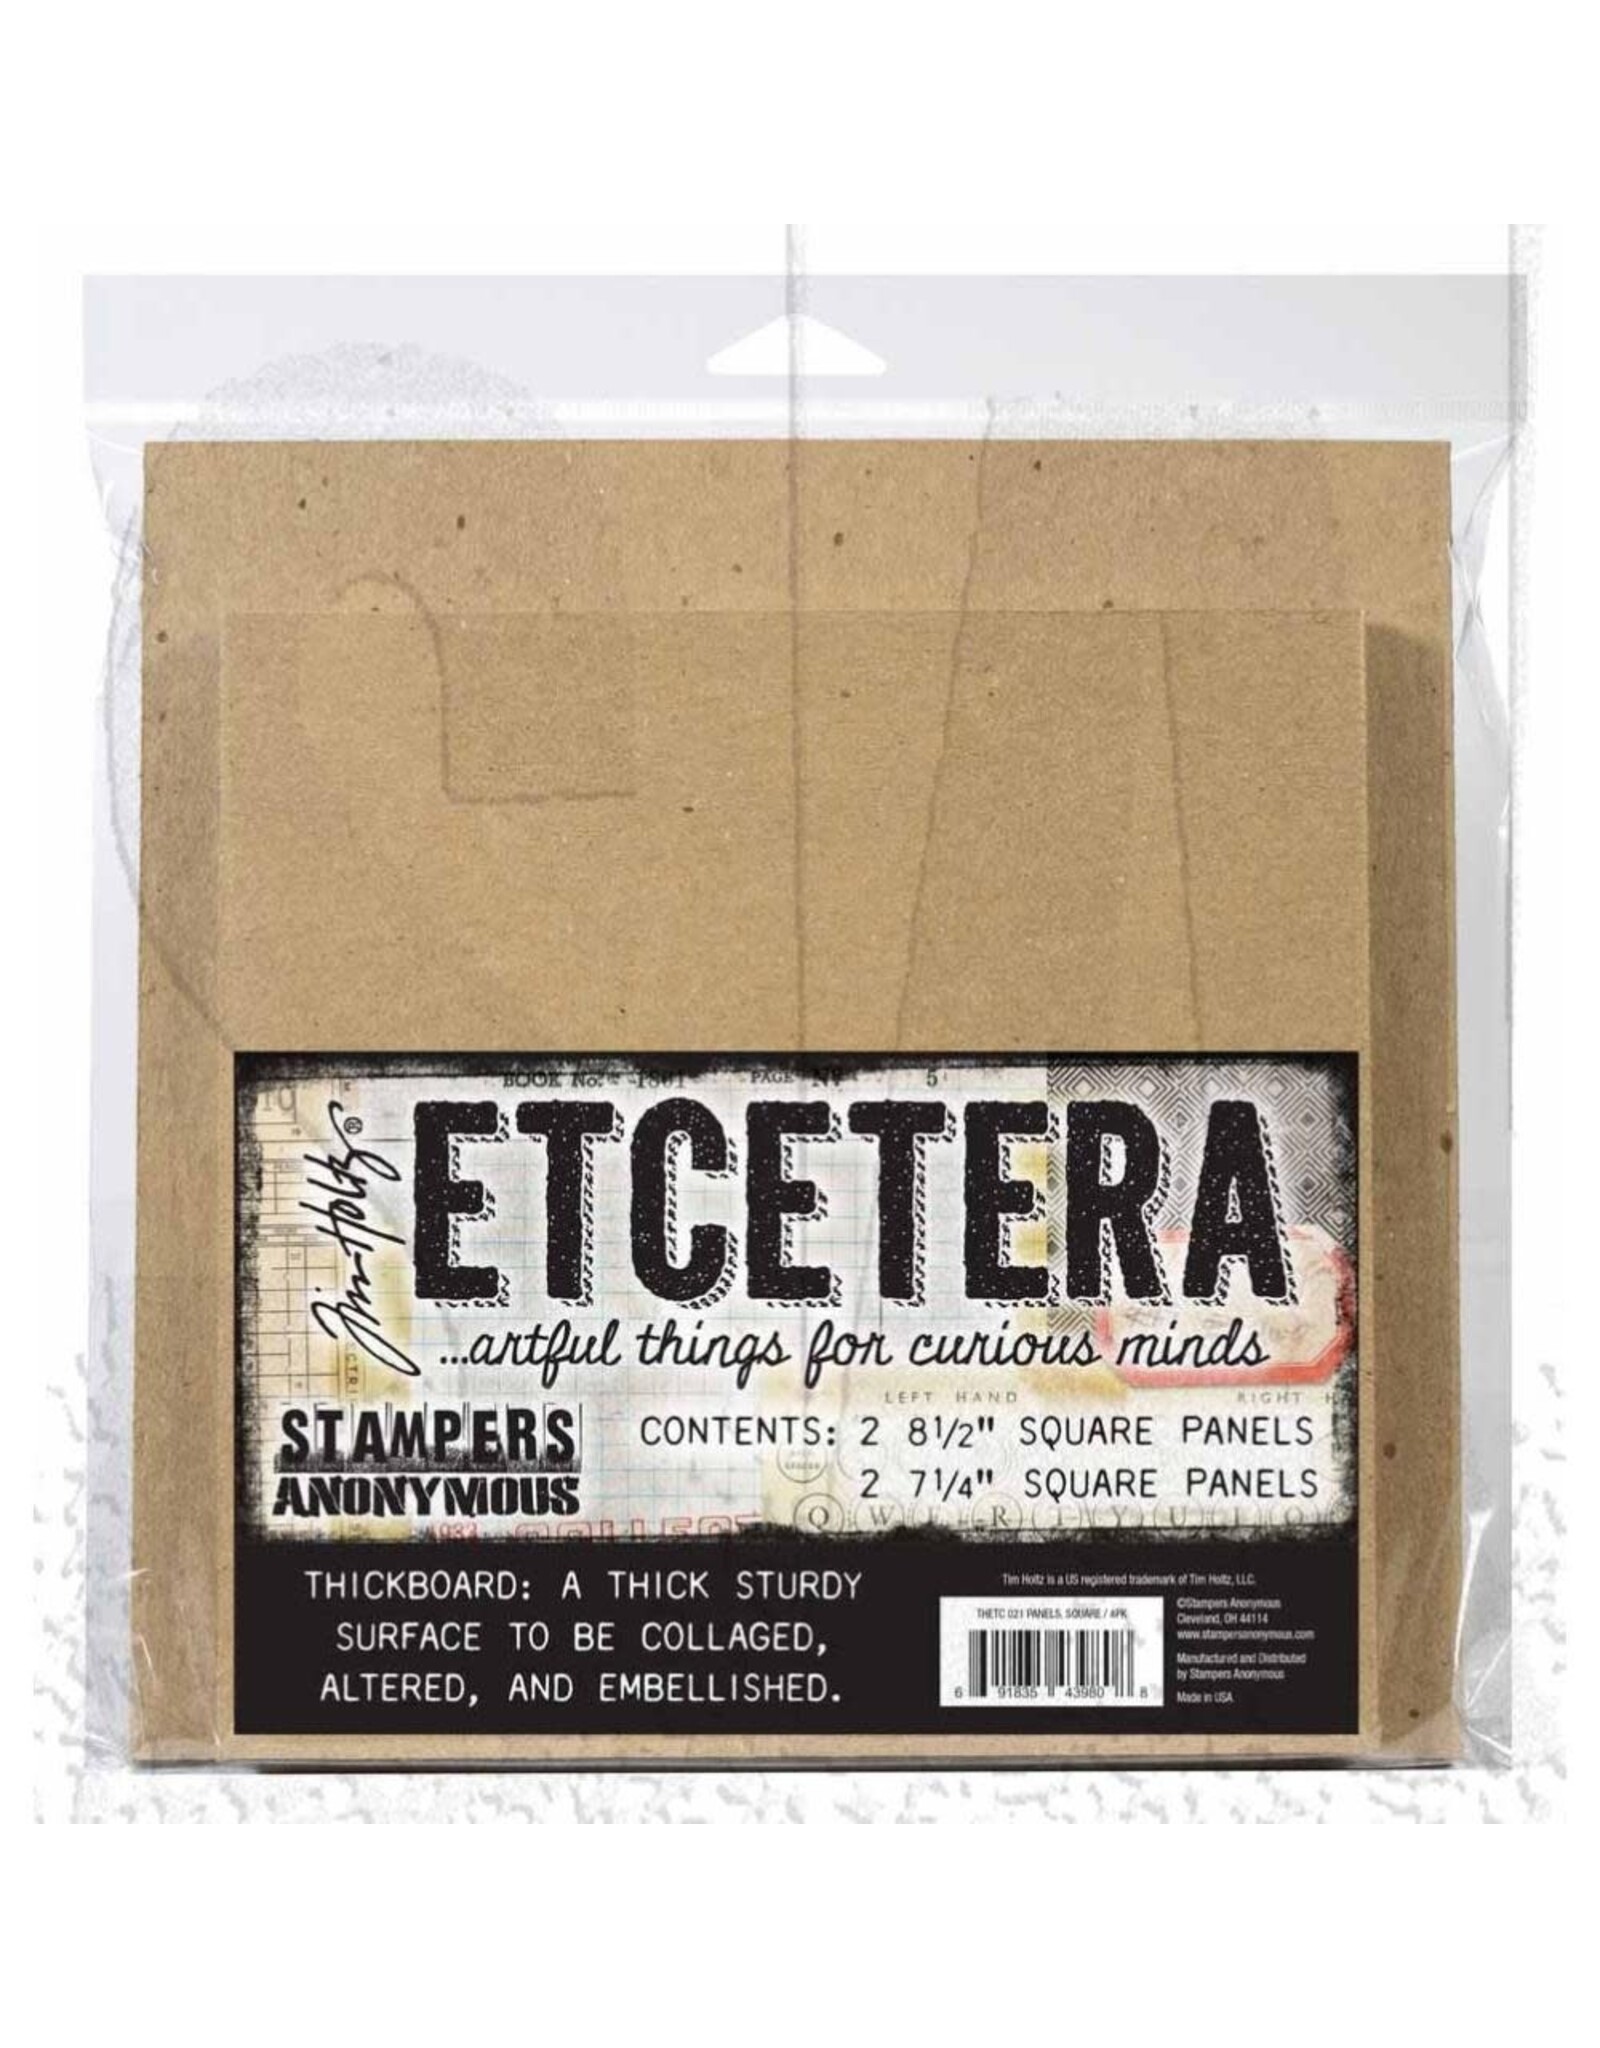 STAMPERS ANONYMOUS STAMPERS ANONYMOUS TIM HOLTZ SQUARE ETCETERA PANELS